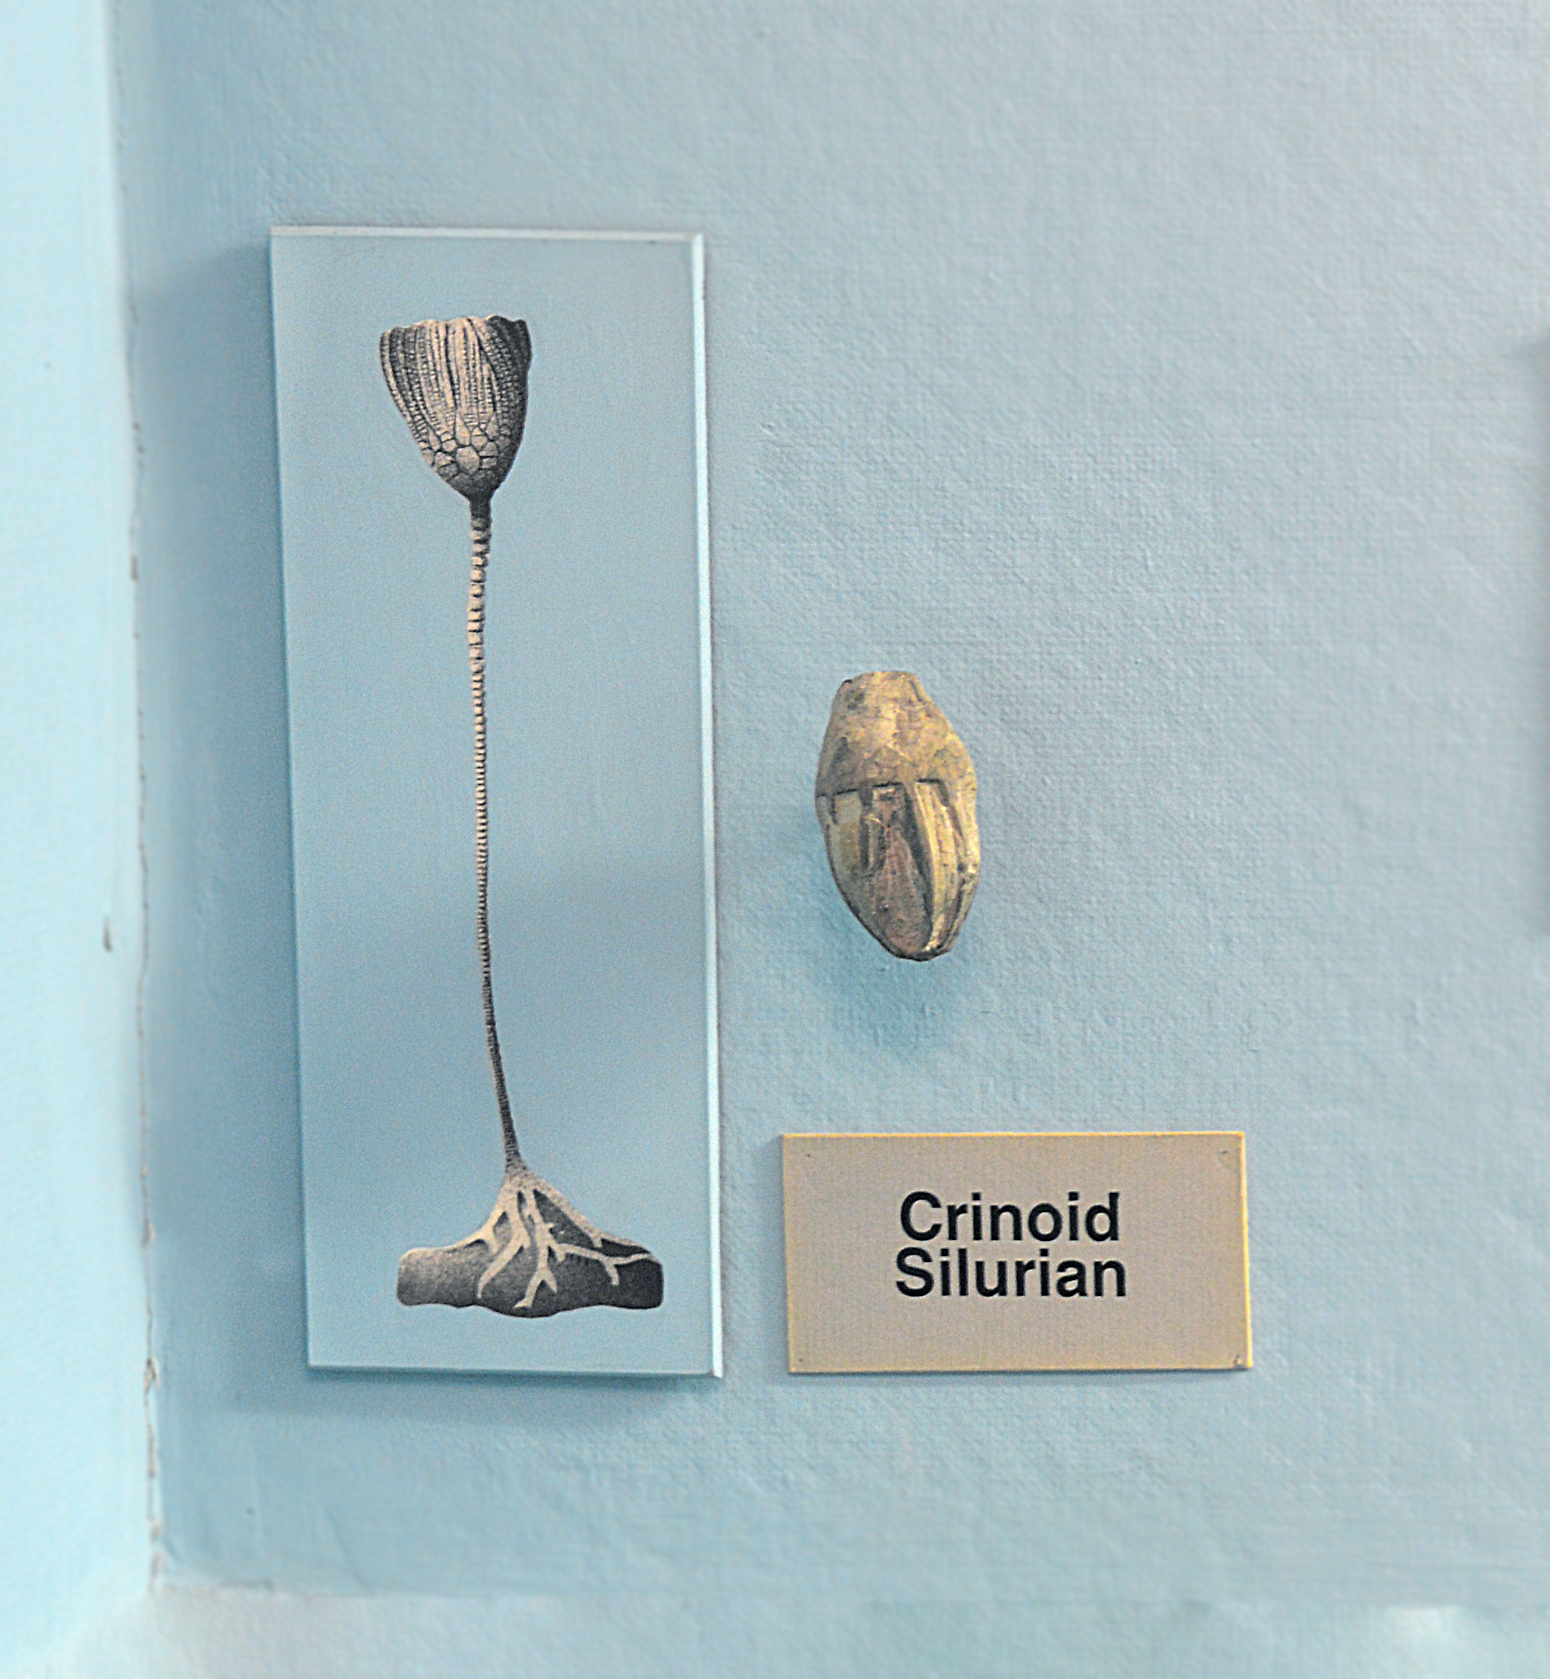 Illustration and fossil of crinoid